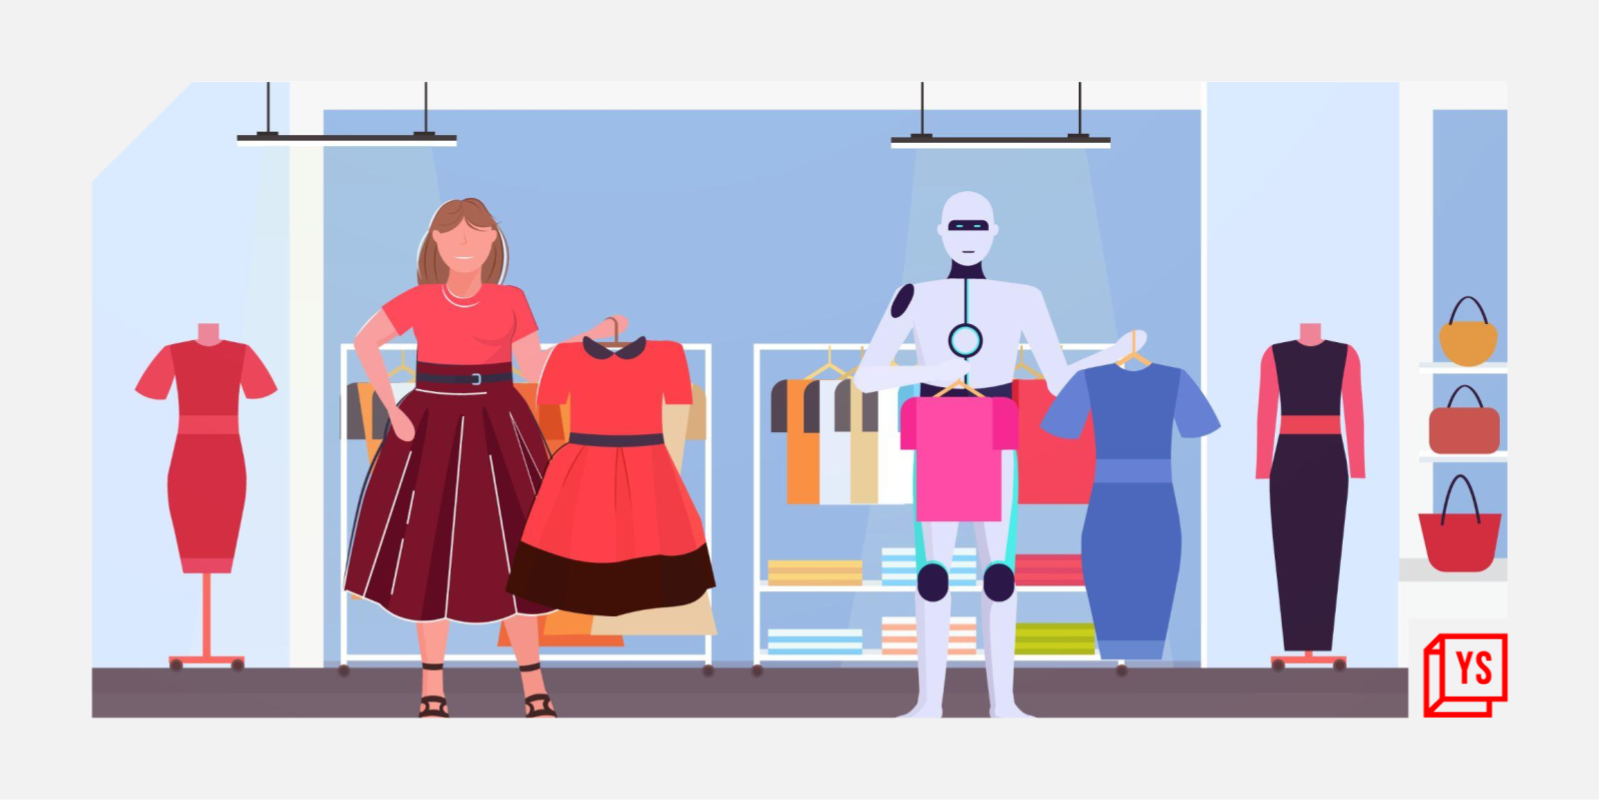 How AI, ML, Big Data are facilitating innovation in the fashion industry 

